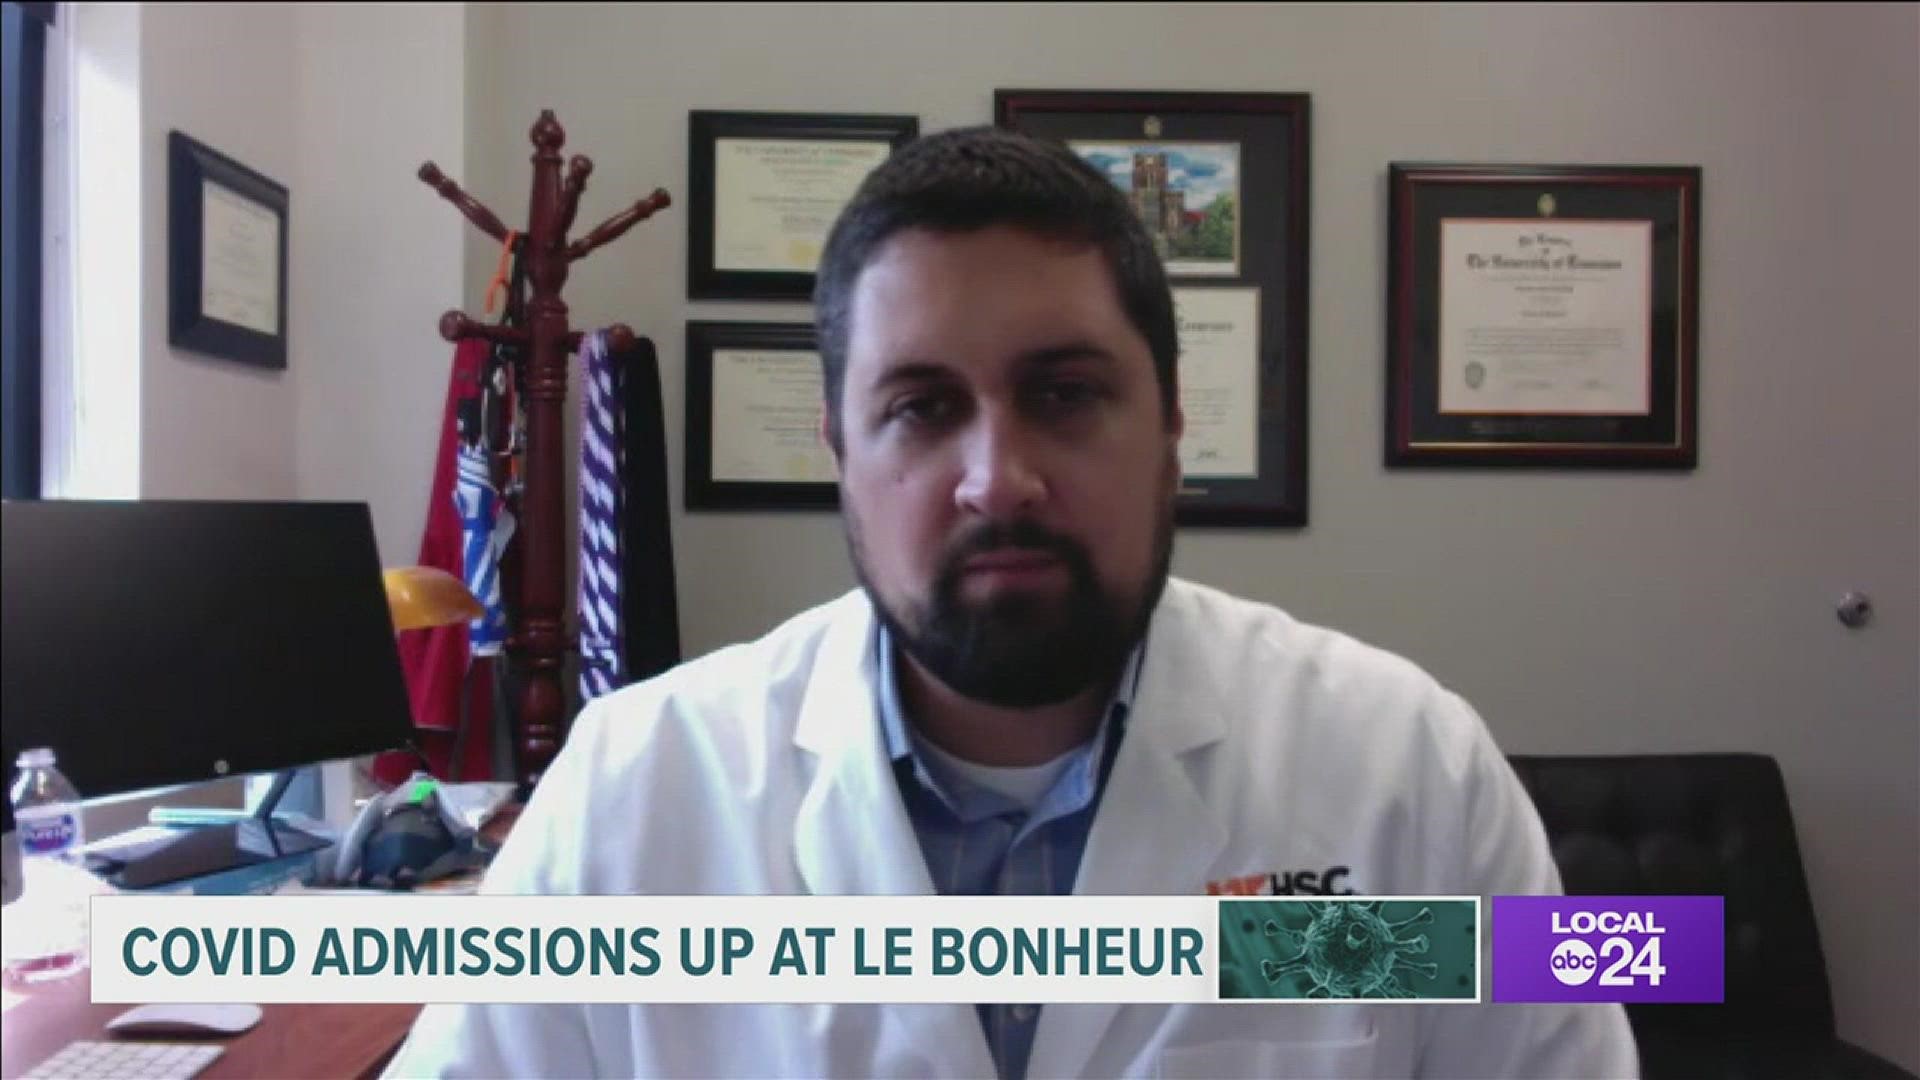 Le Bonheur said 19 children are currently hospitalized there, with six of them in the ICU. Last week, there were 8 cases, with two in critical care.